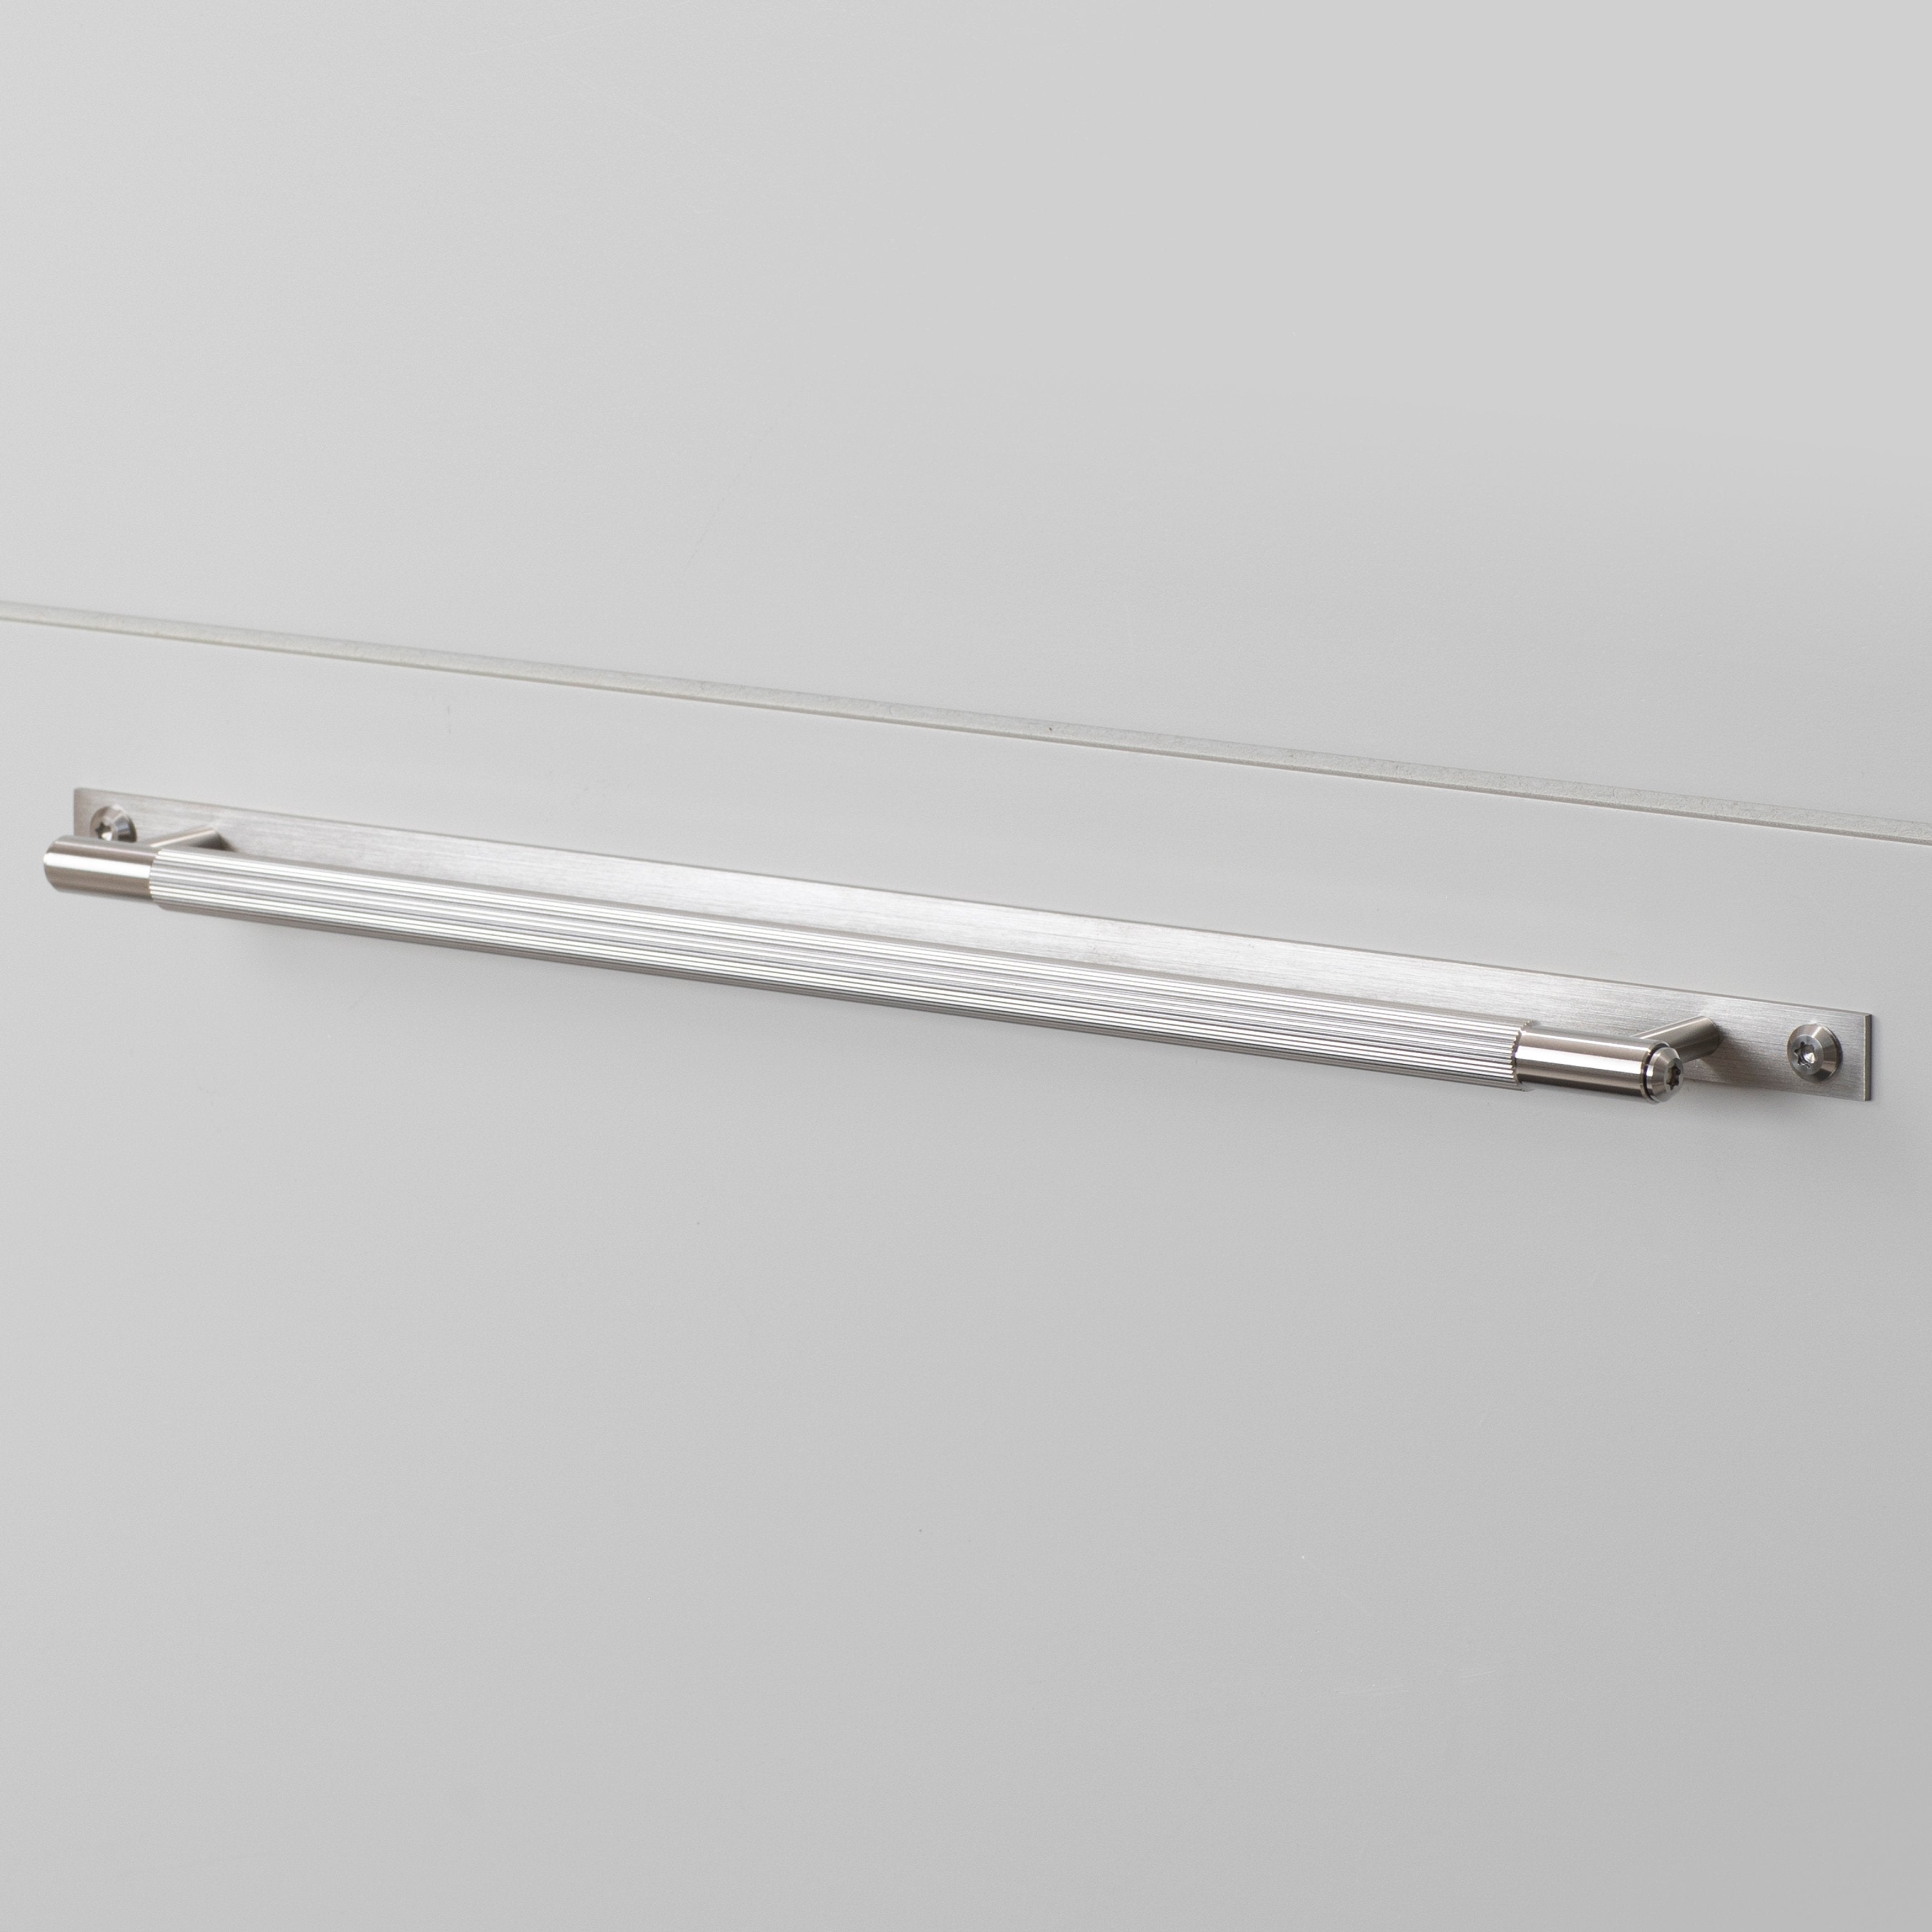 PULL BAR / PLATE / LINEAR / STEEL - LARGE - No.42 Interiors